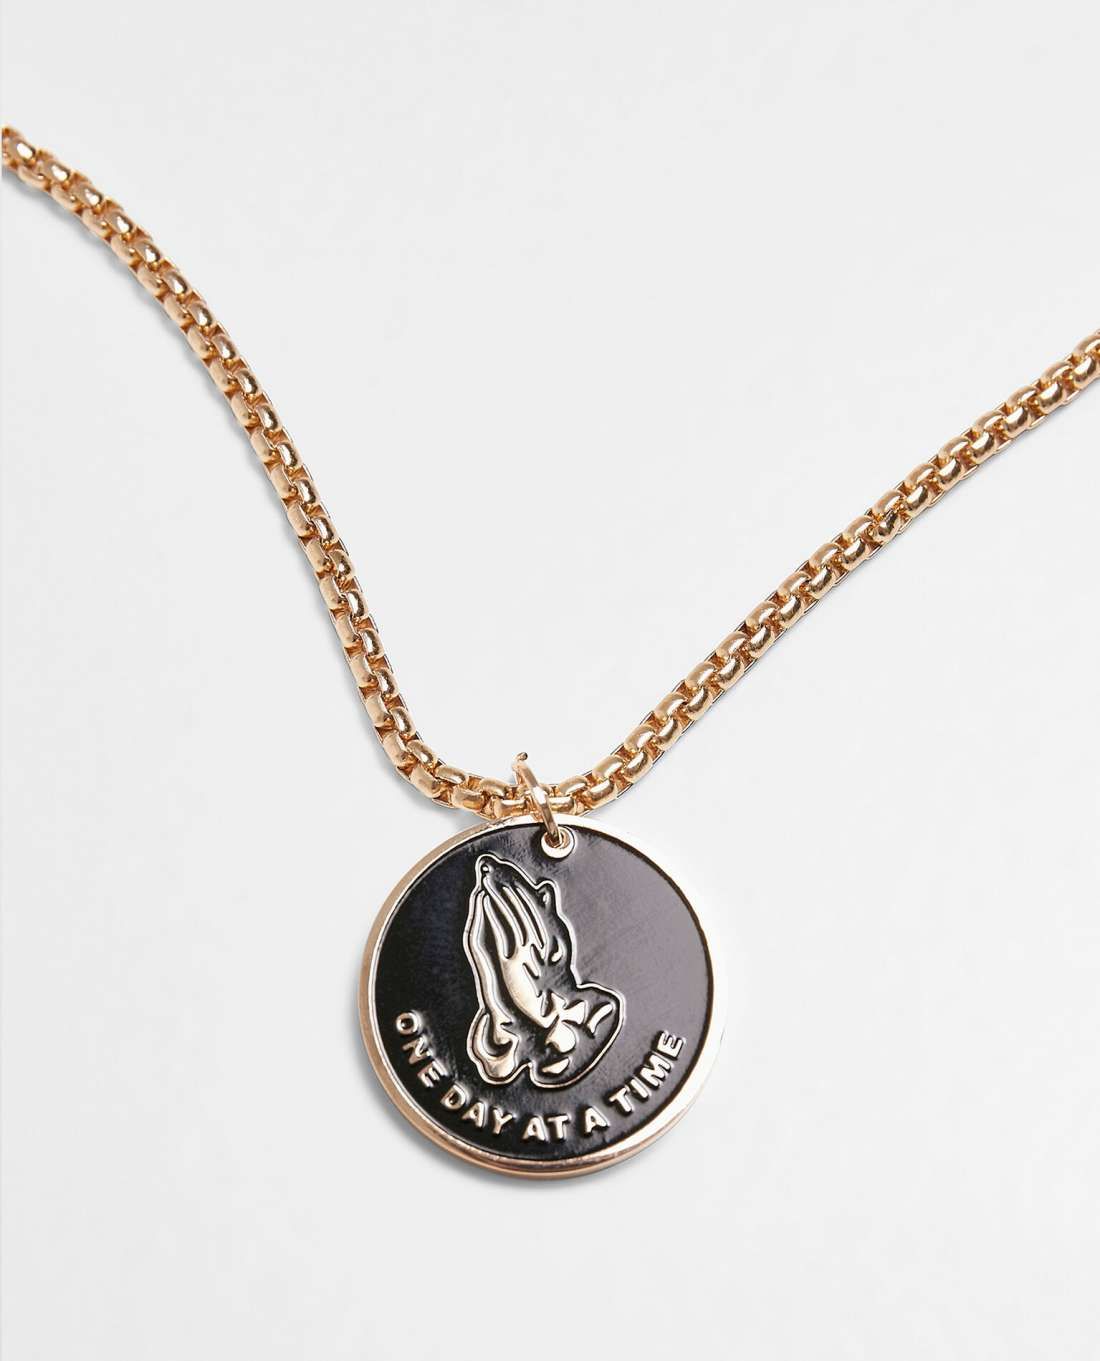 Pray Hands Coin Necklace Gold Tone Urban Classics